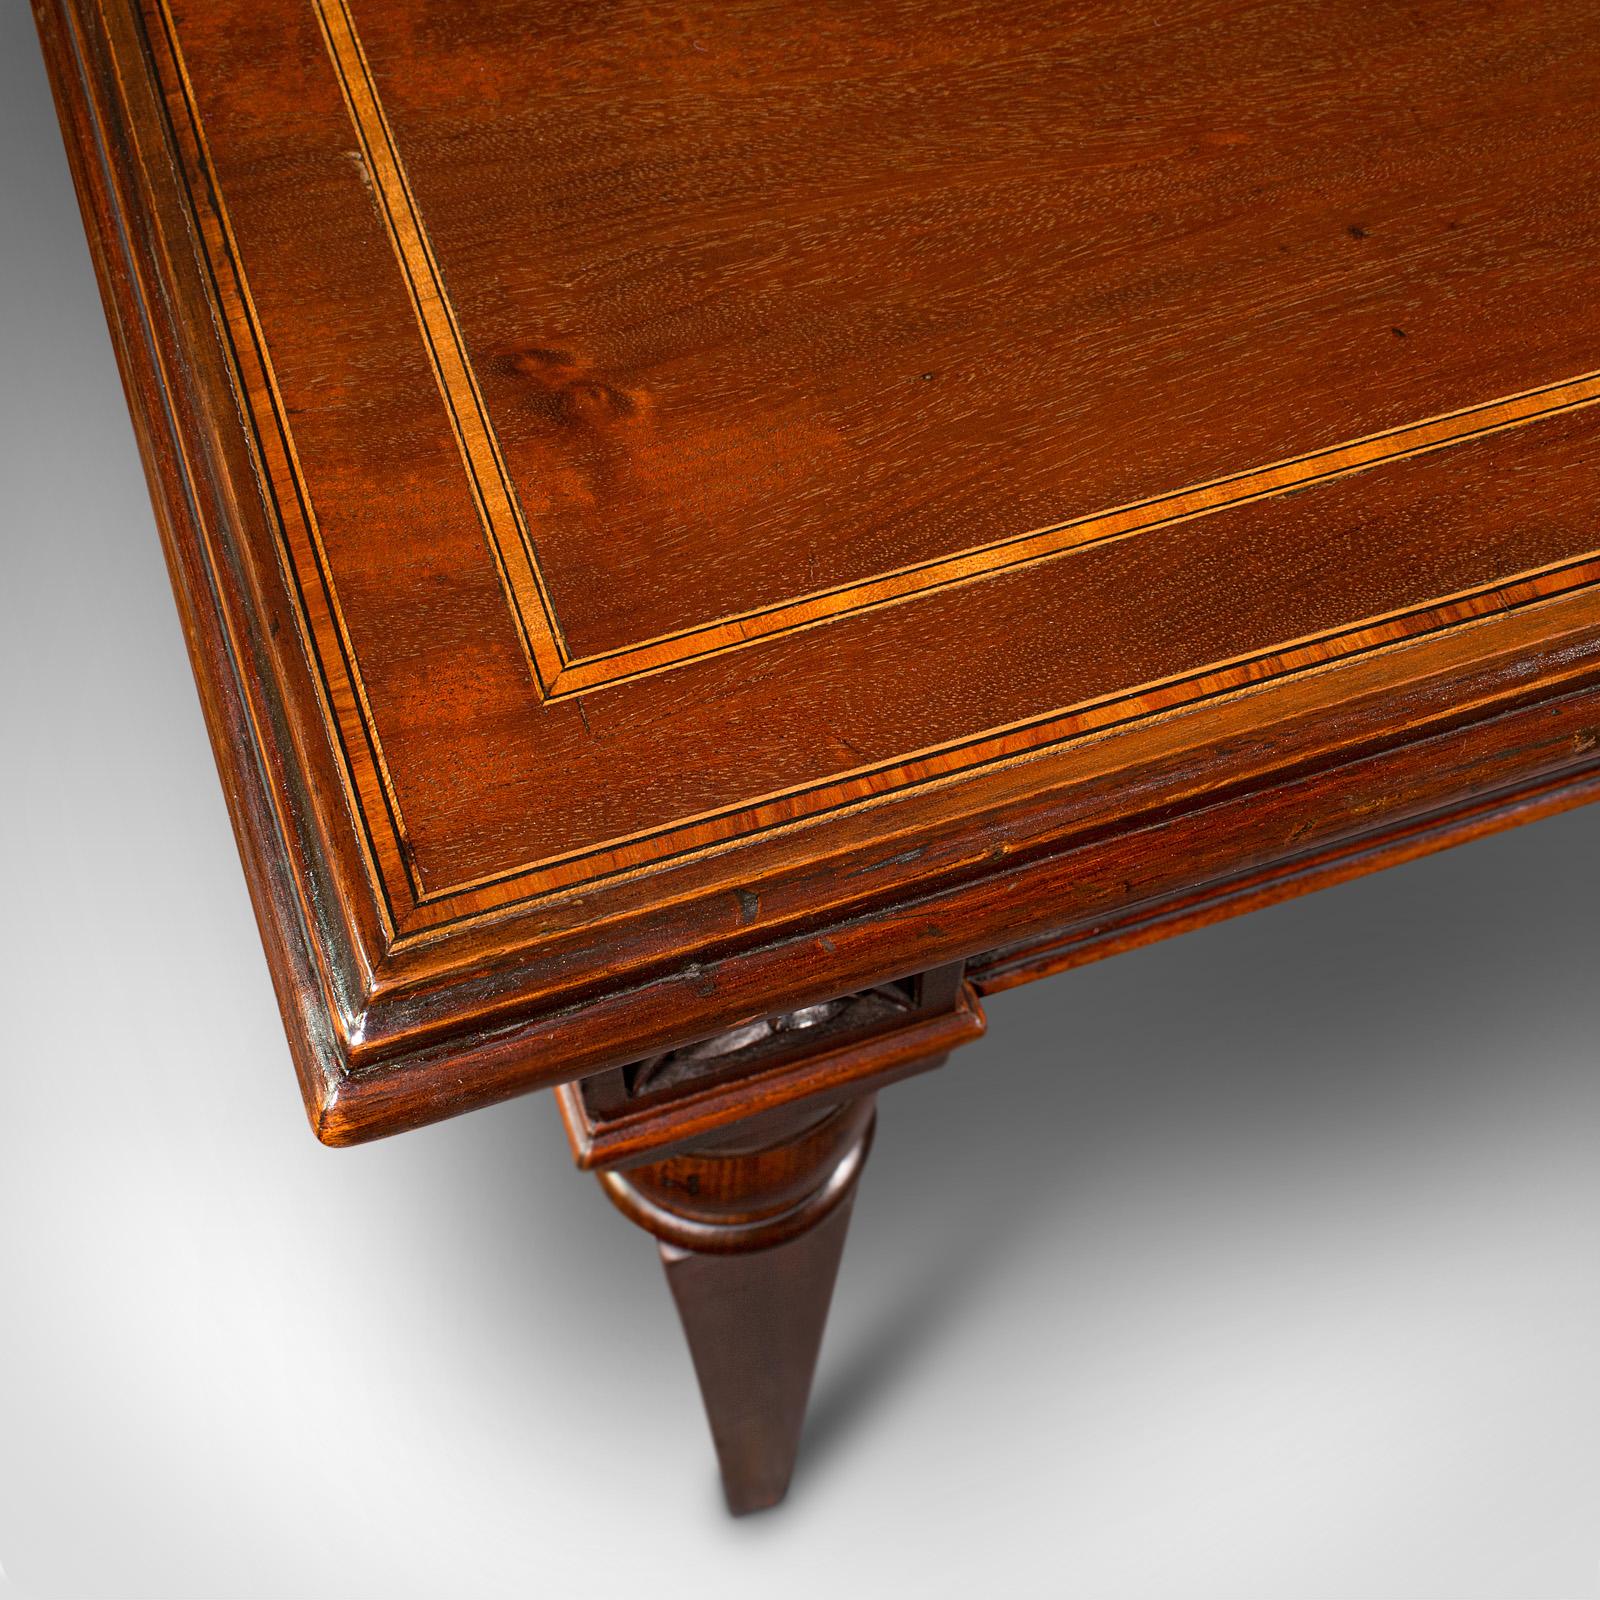 Antique Writer's Desk, English, Inlay, Side, Serving Table, Georgian, C.1800 For Sale 2